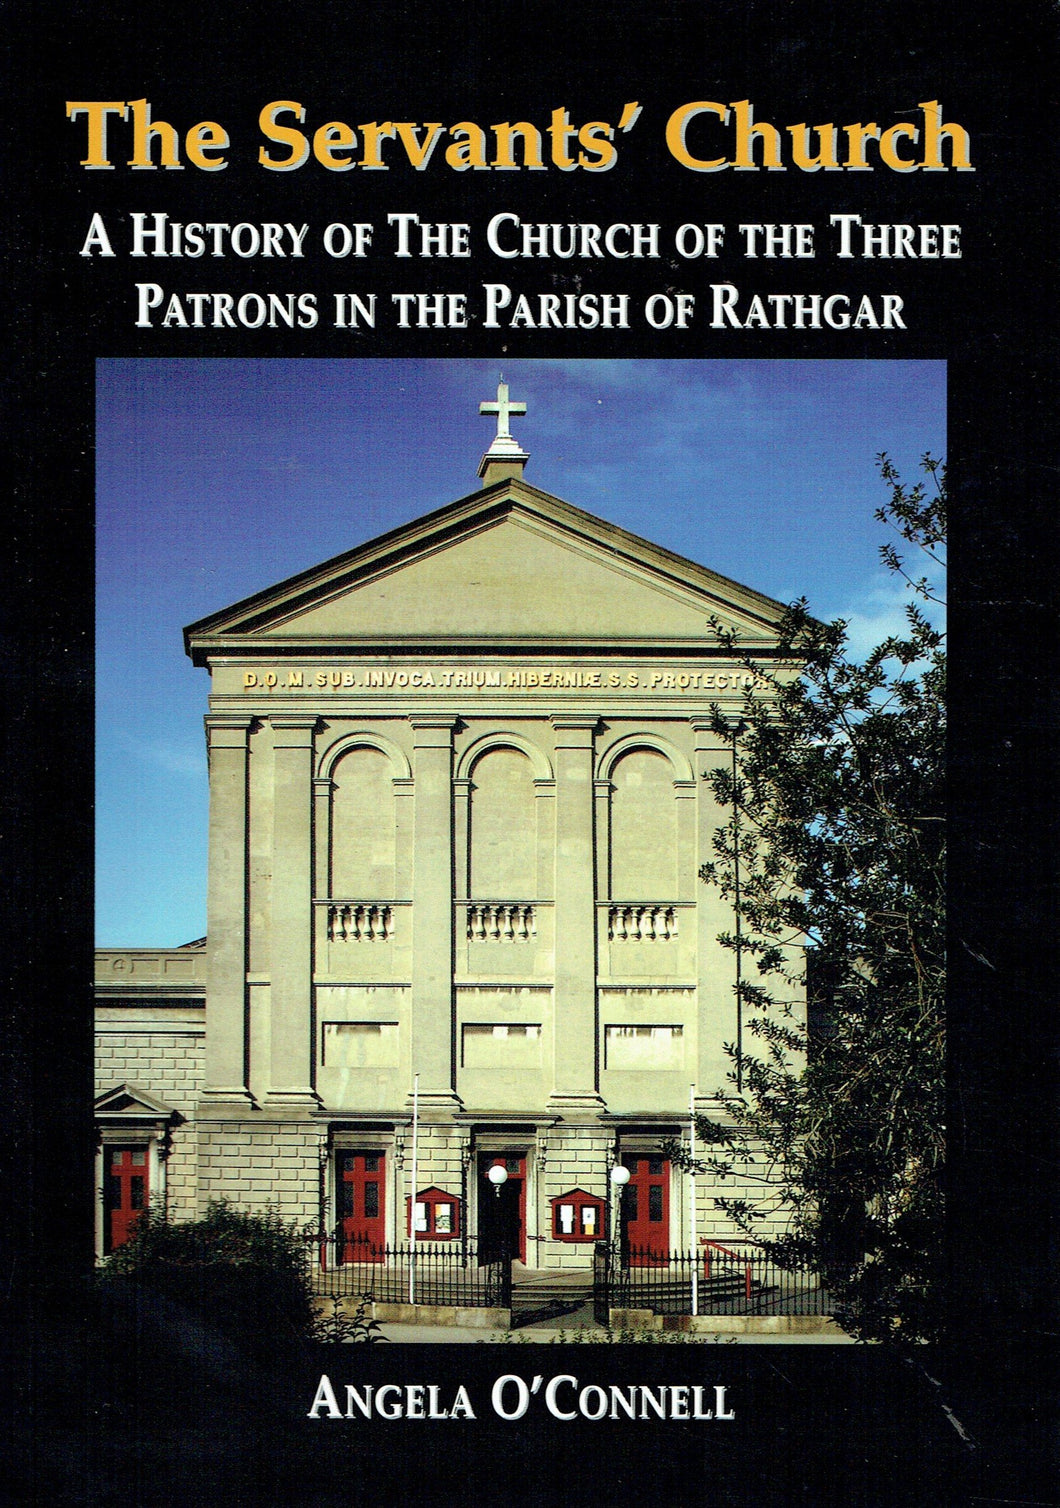 The Servants' Church: a History of the Church of the Three Patrons in the Parish of Rathgar